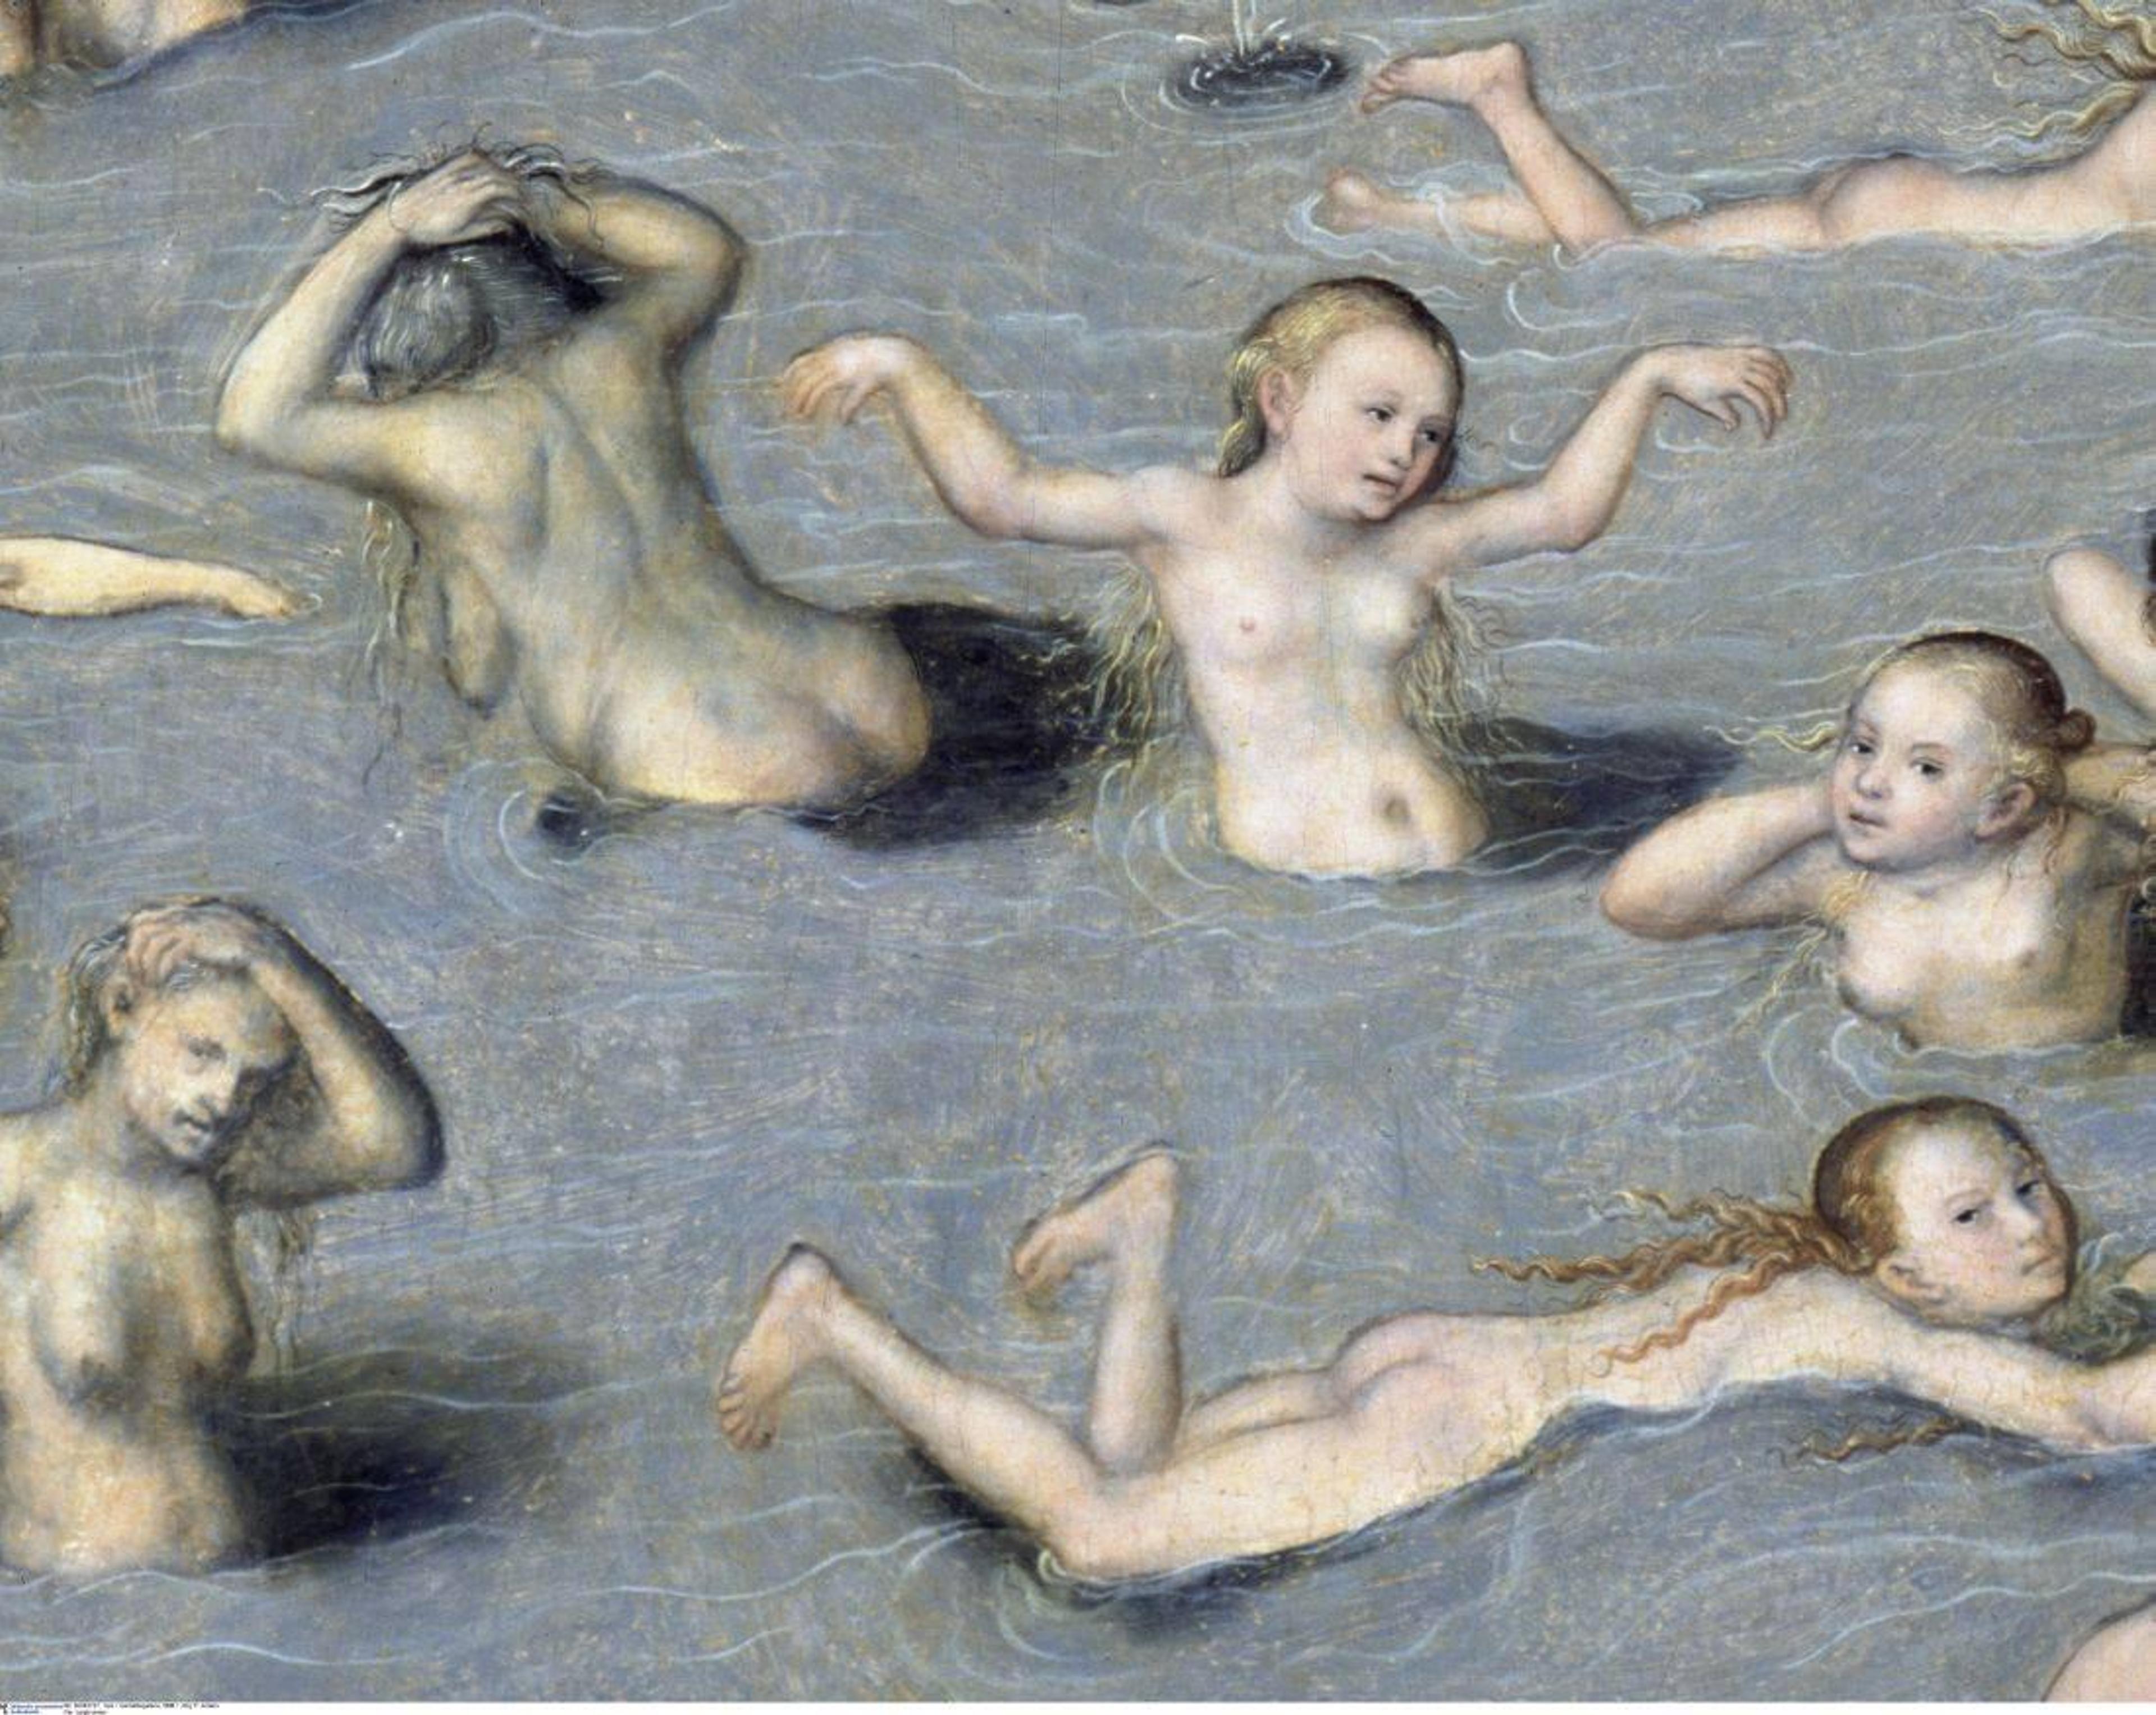 Detail from Lucas Cranach the Elder, The Fountain of Youth, 1546.